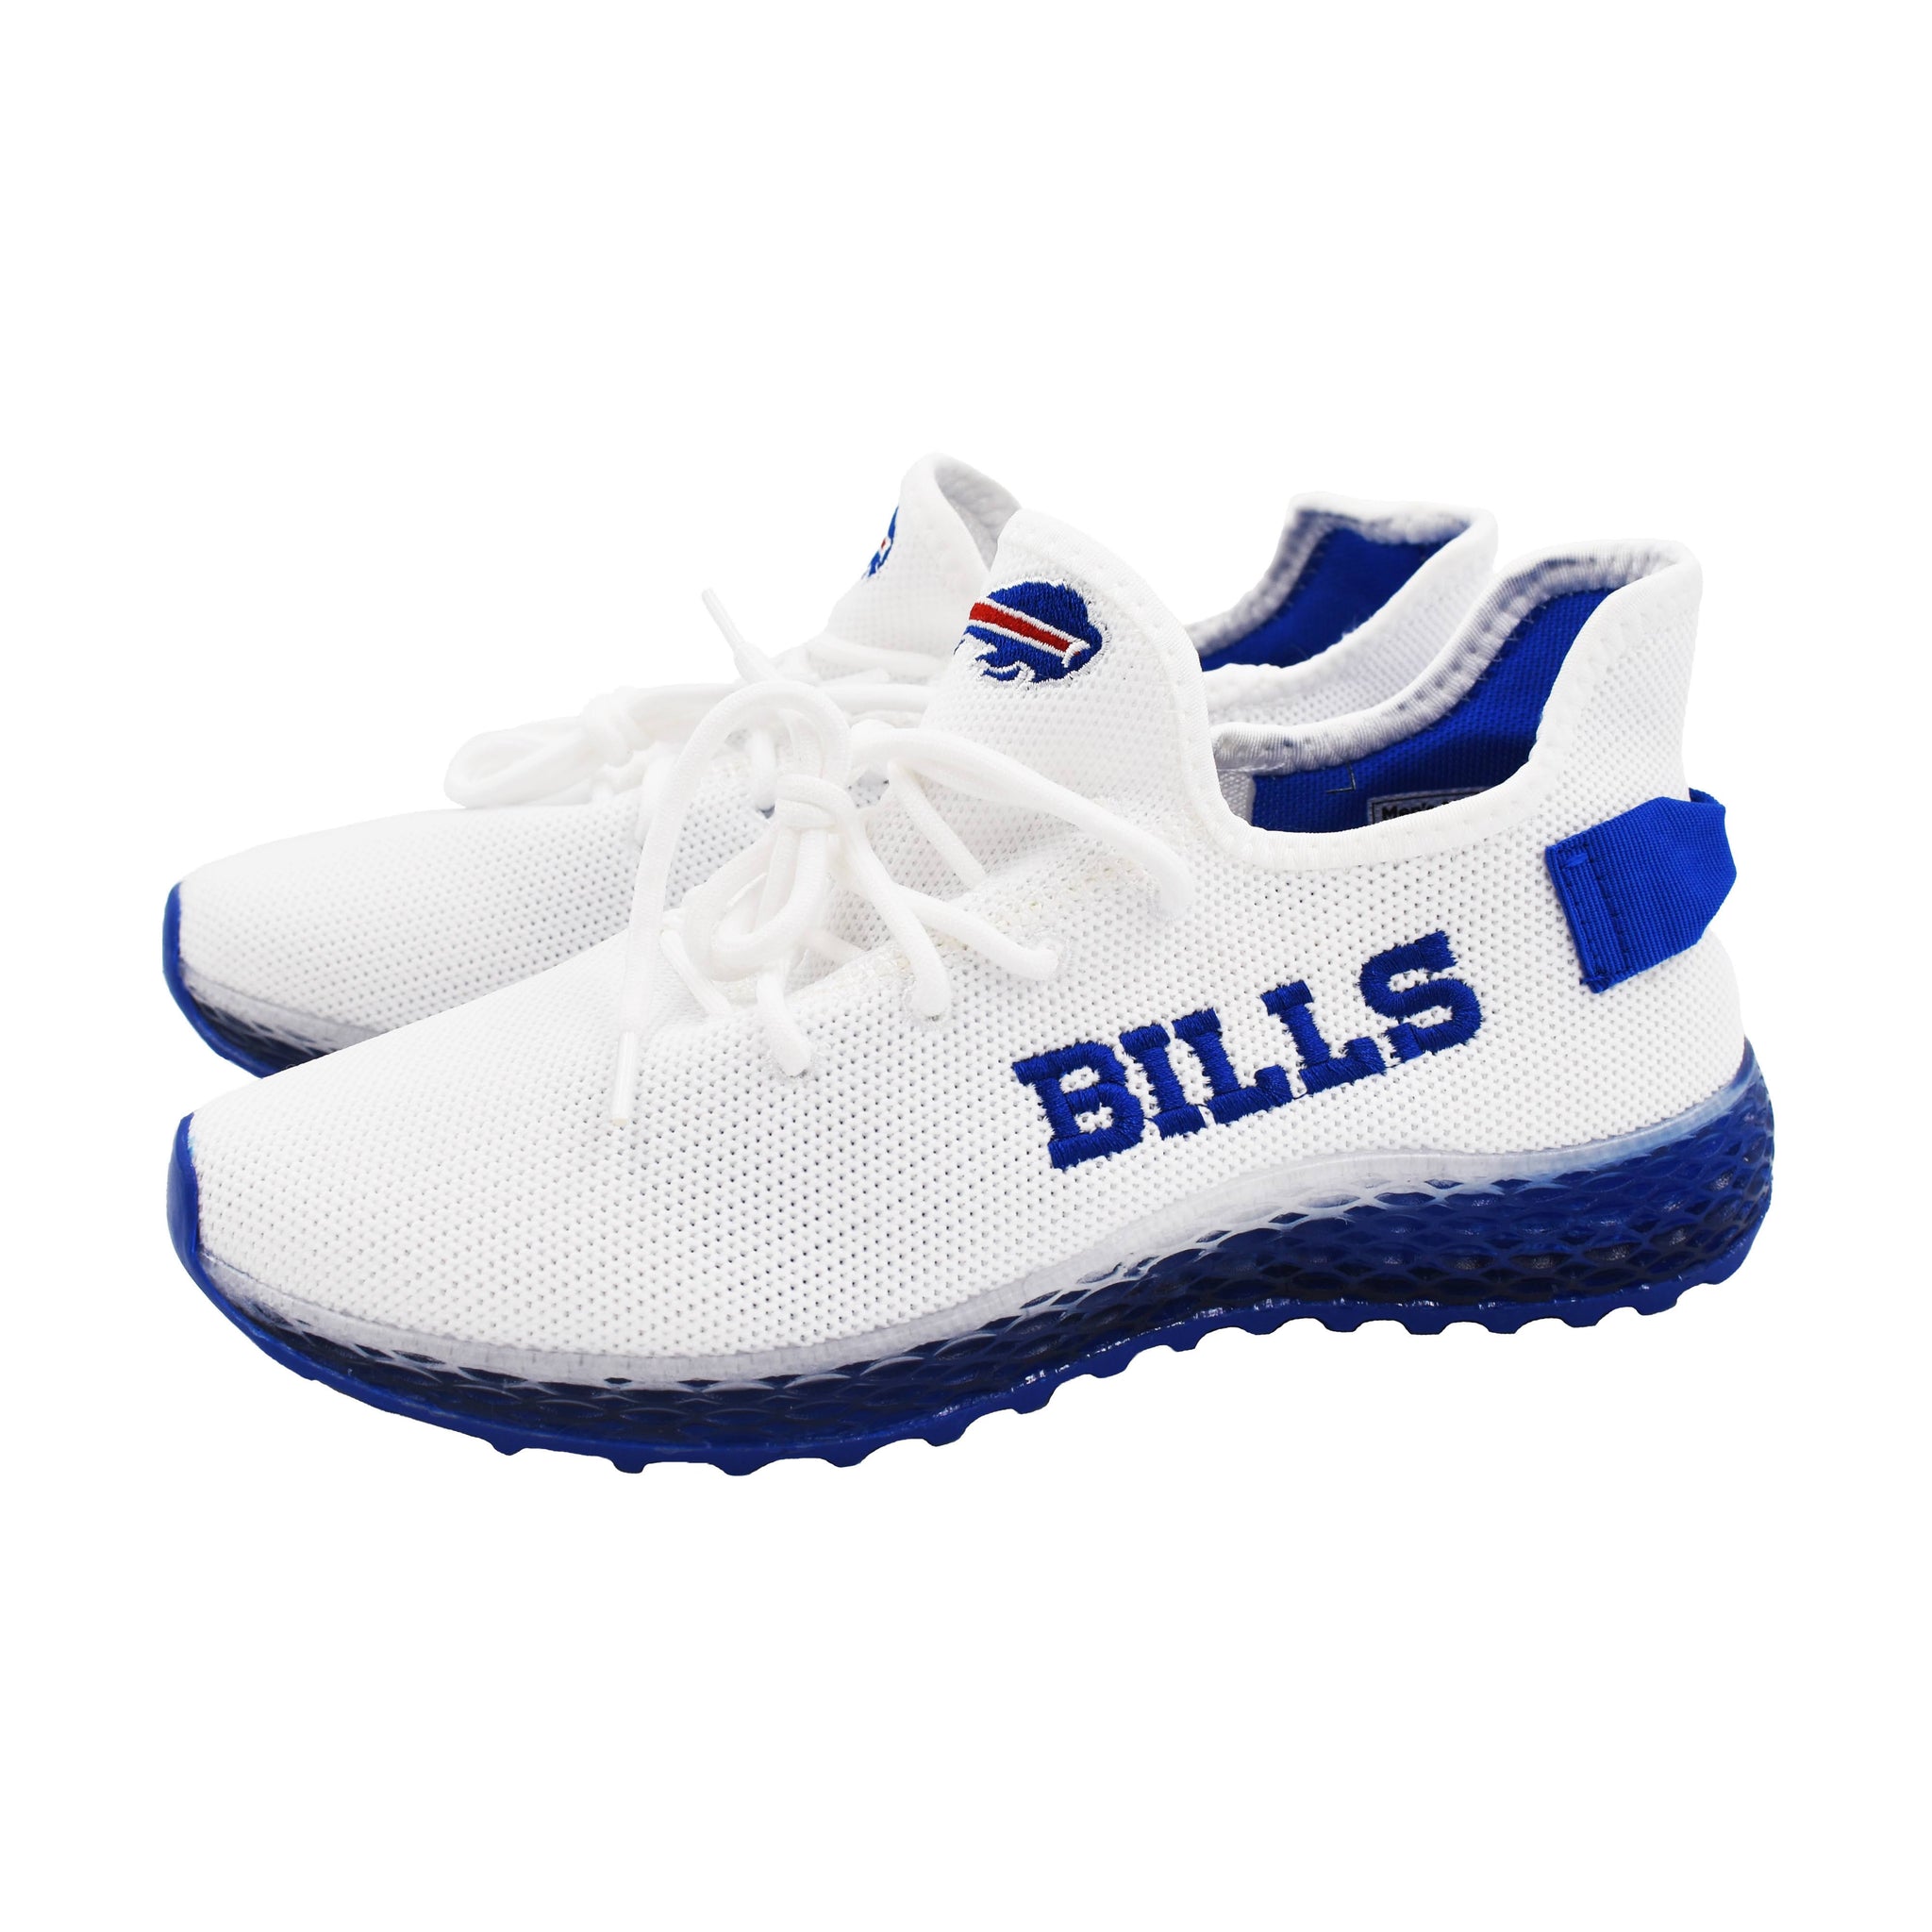 The BFLO Store - Official Retailer of the Buffalo Bills and Sabres